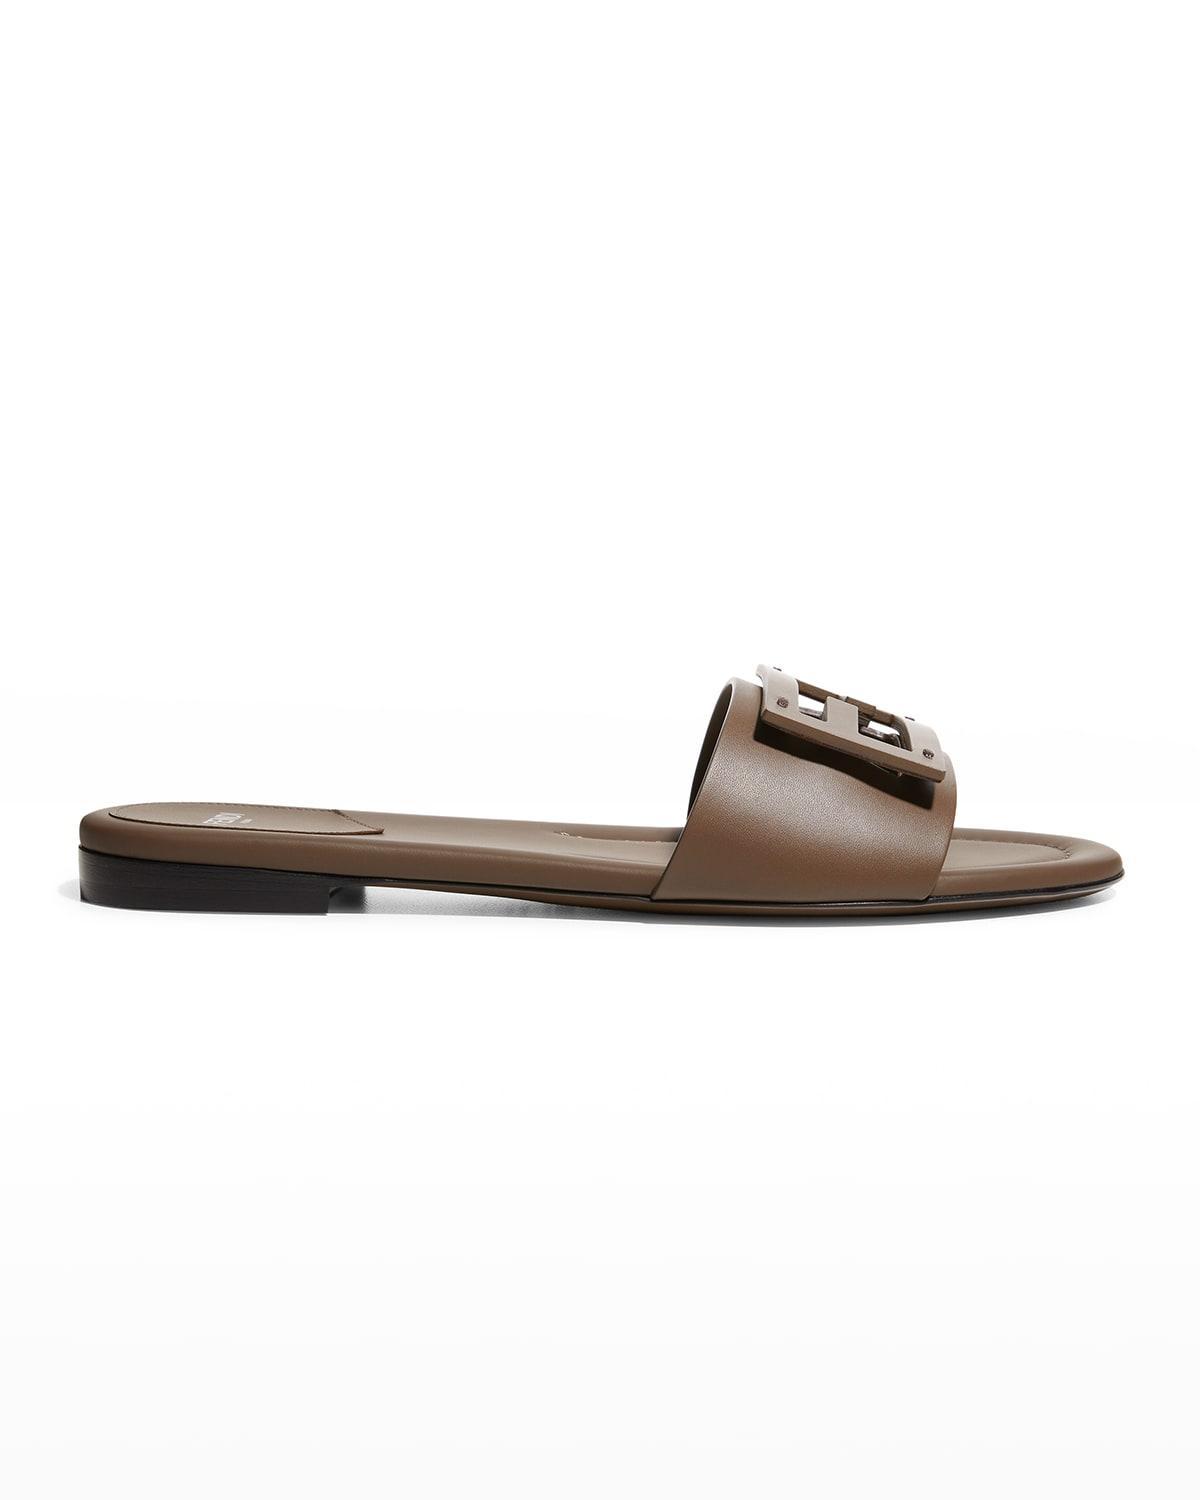 Womens Logo Leather Slide Sandals Product Image